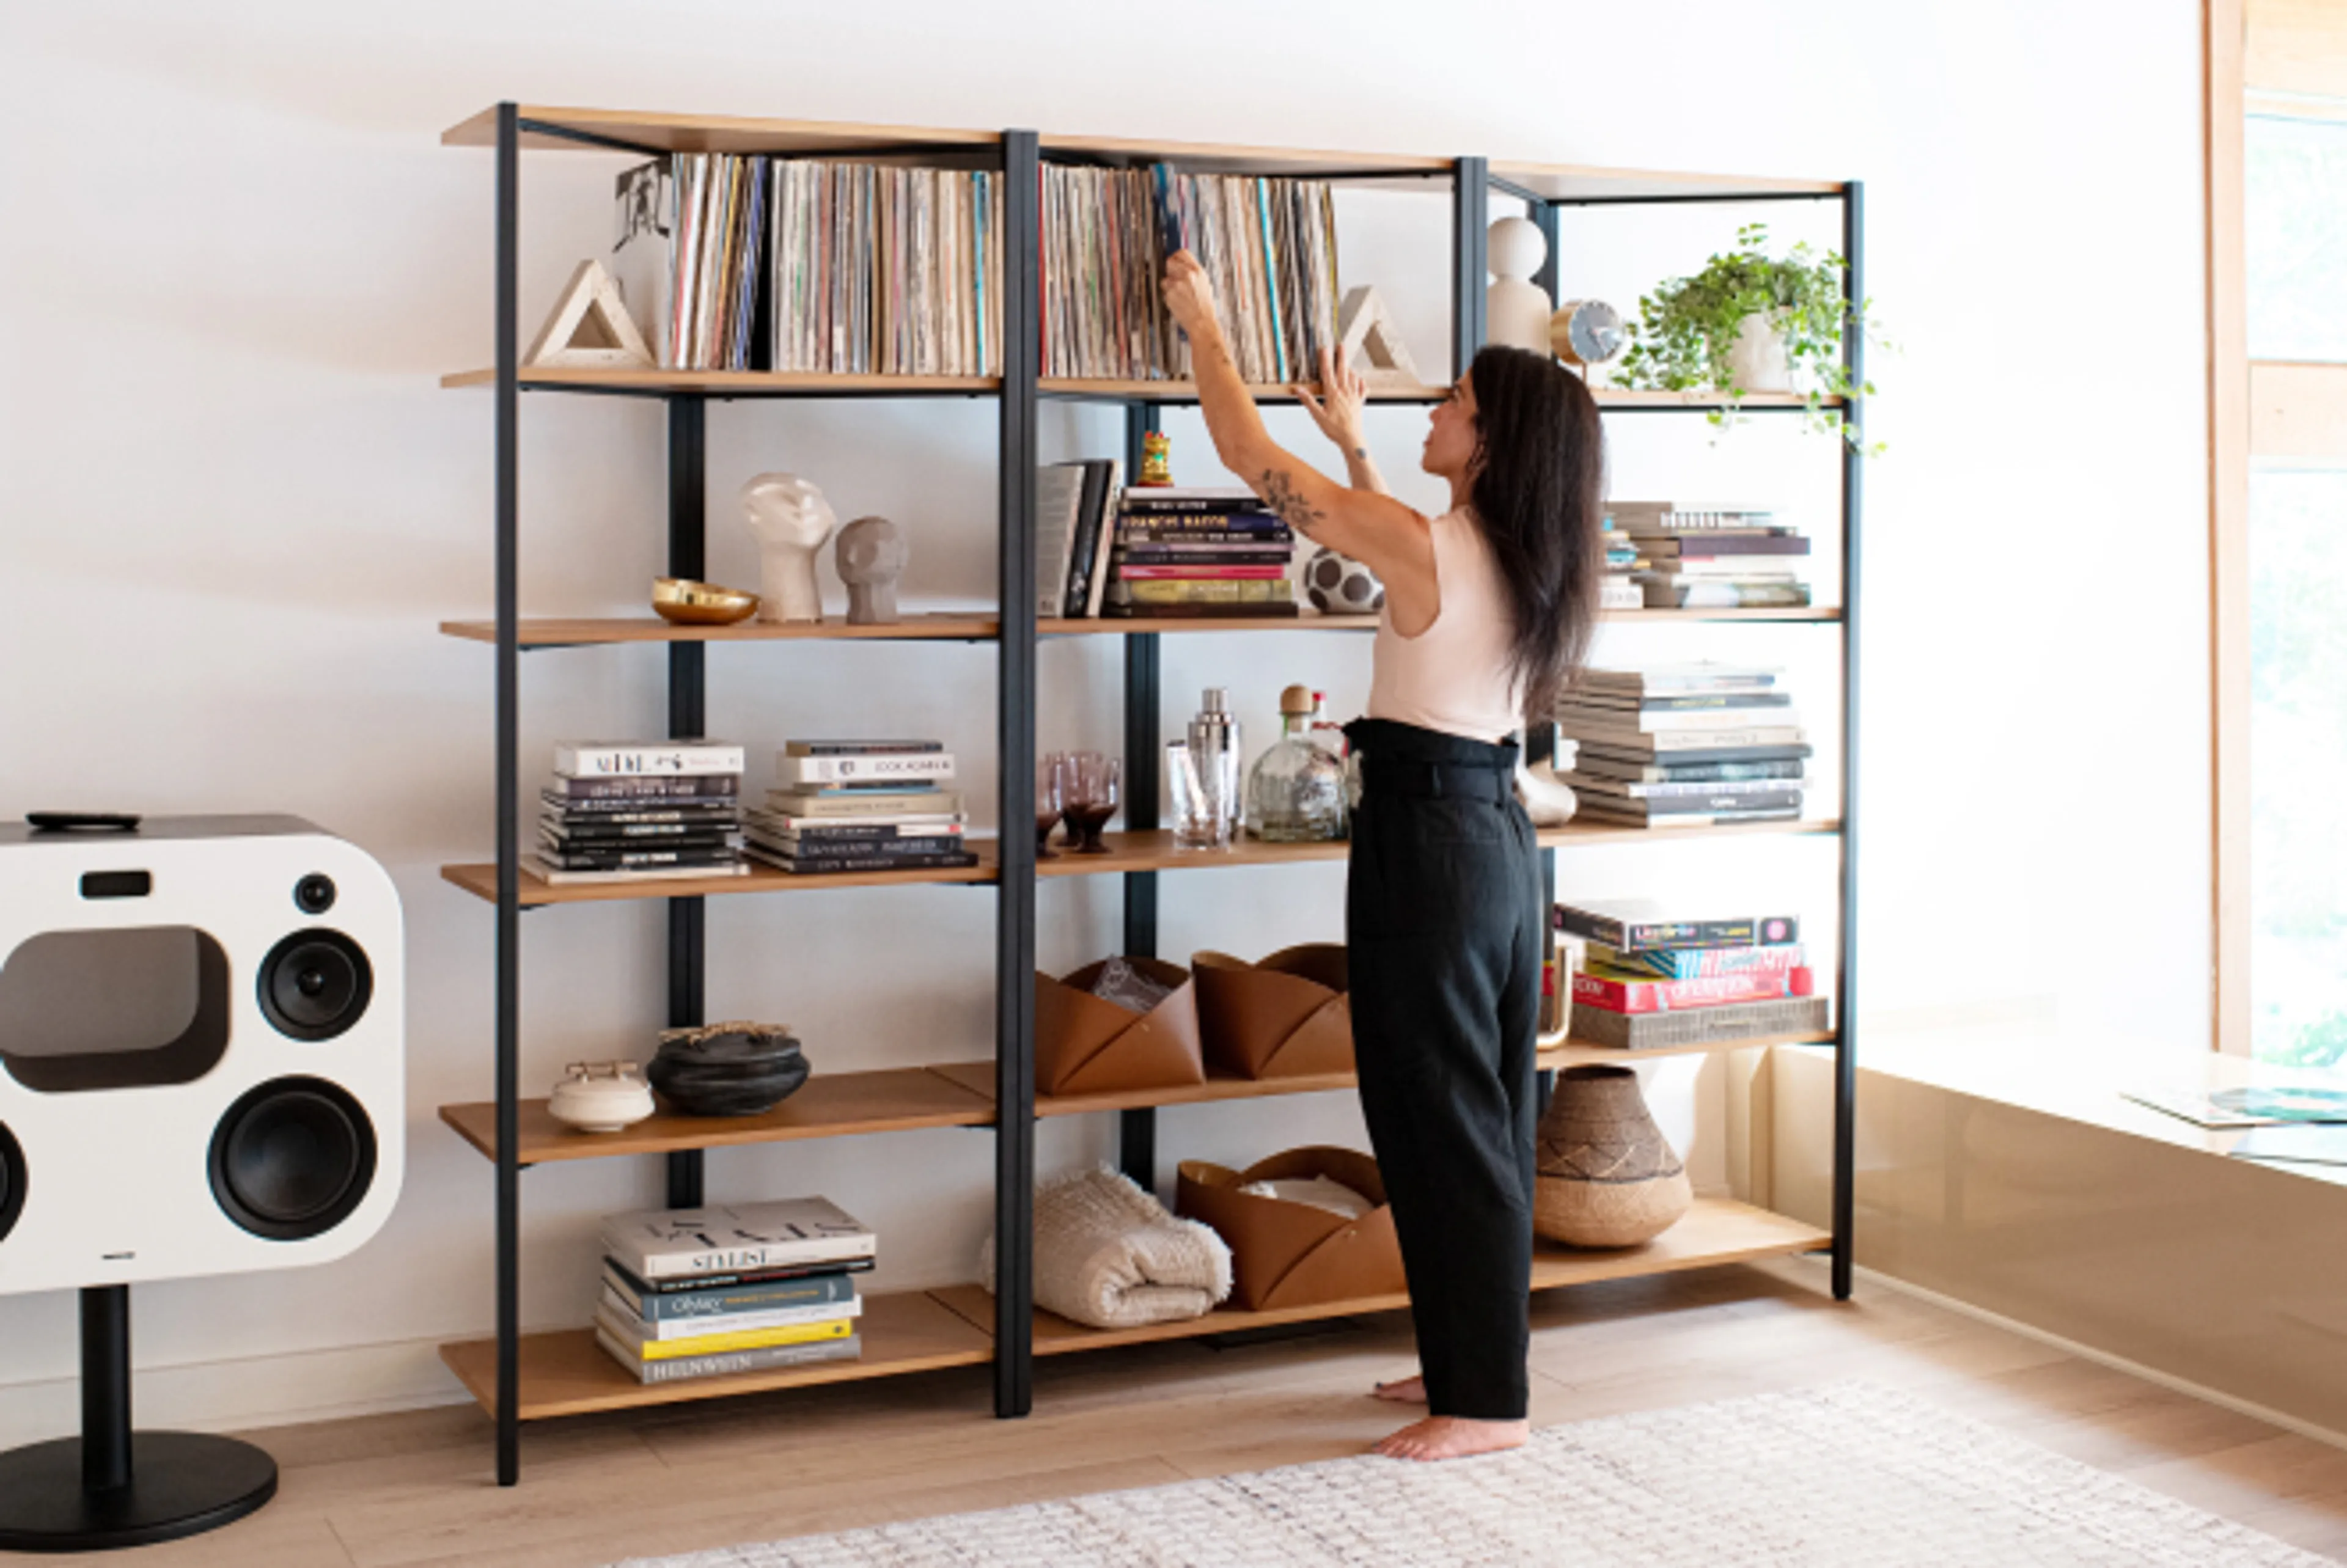 Three tall Canon shelves in a living room setting